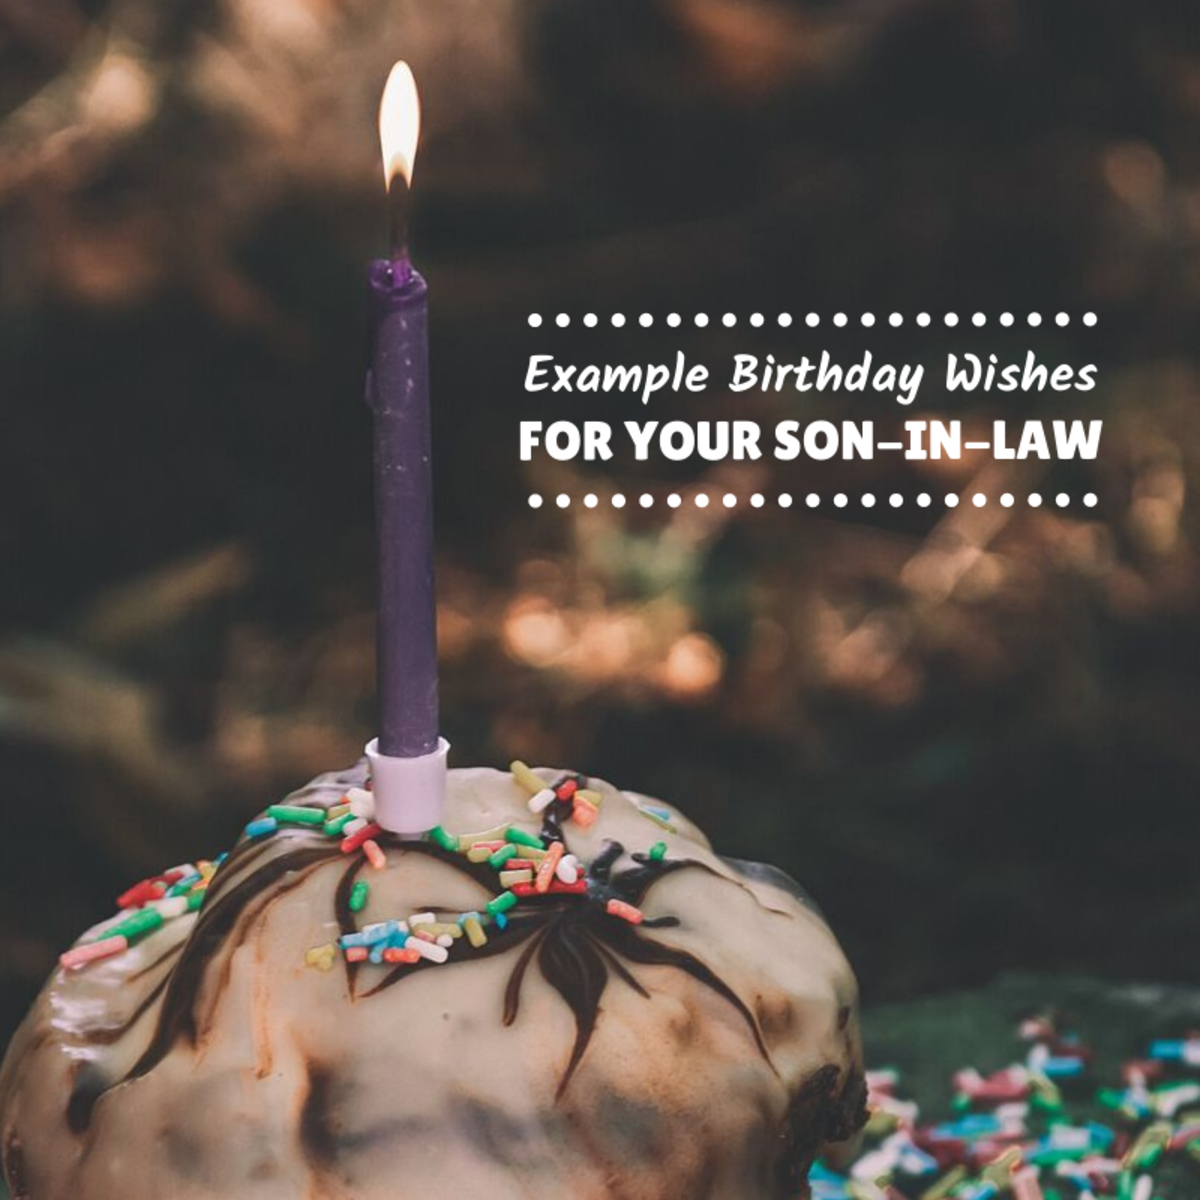 Son-In-Law Birthday Wishes: What to Write in His Card